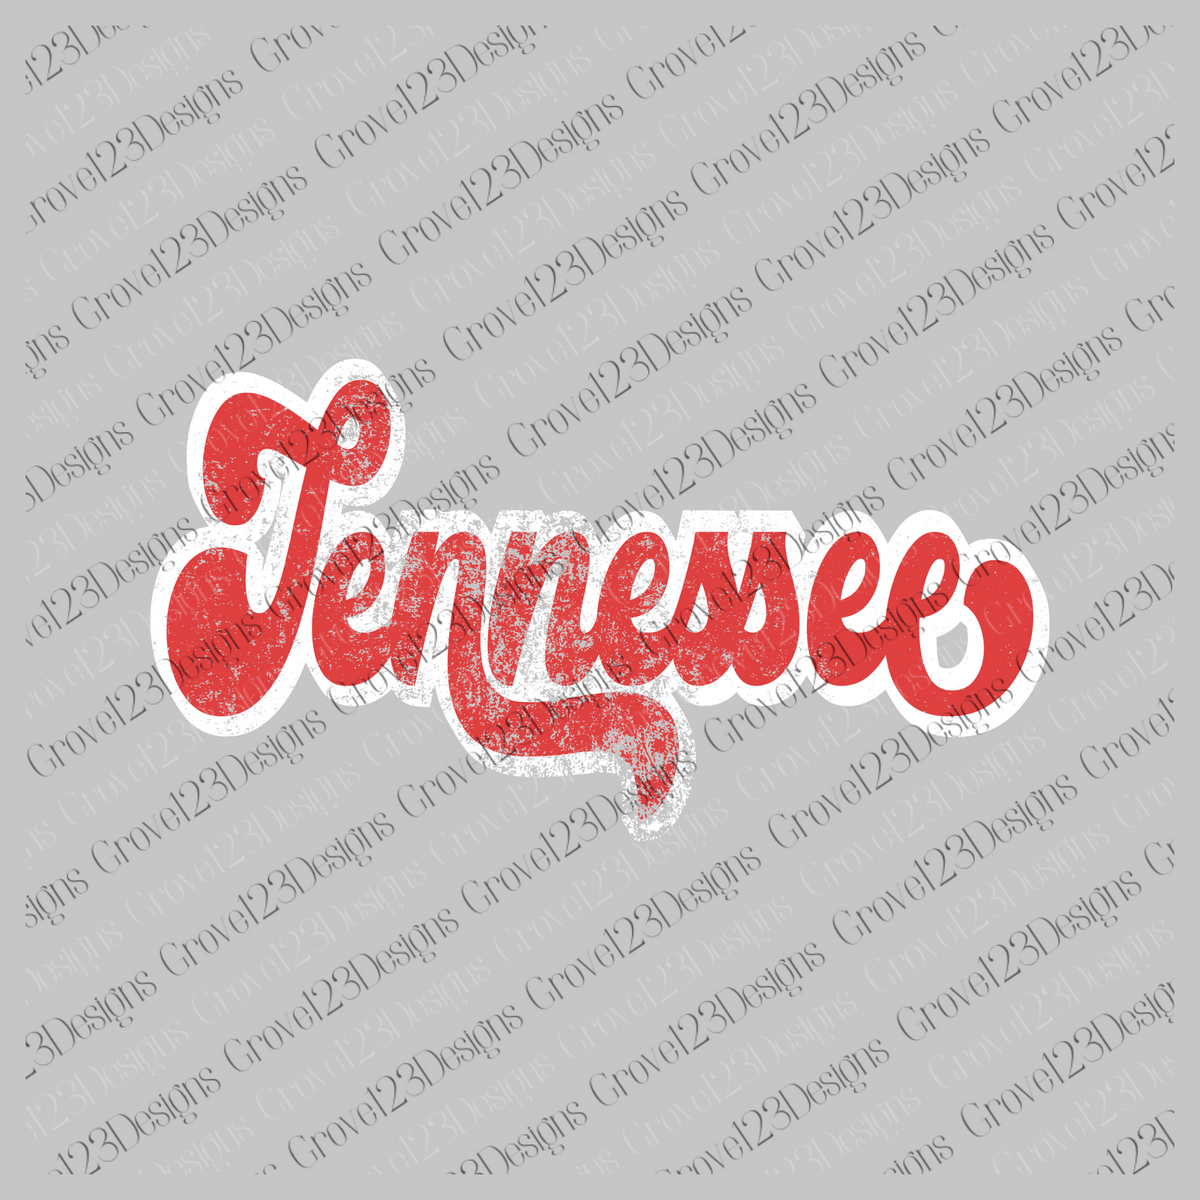 Tennessee Red & White Retro Shadow Distressed